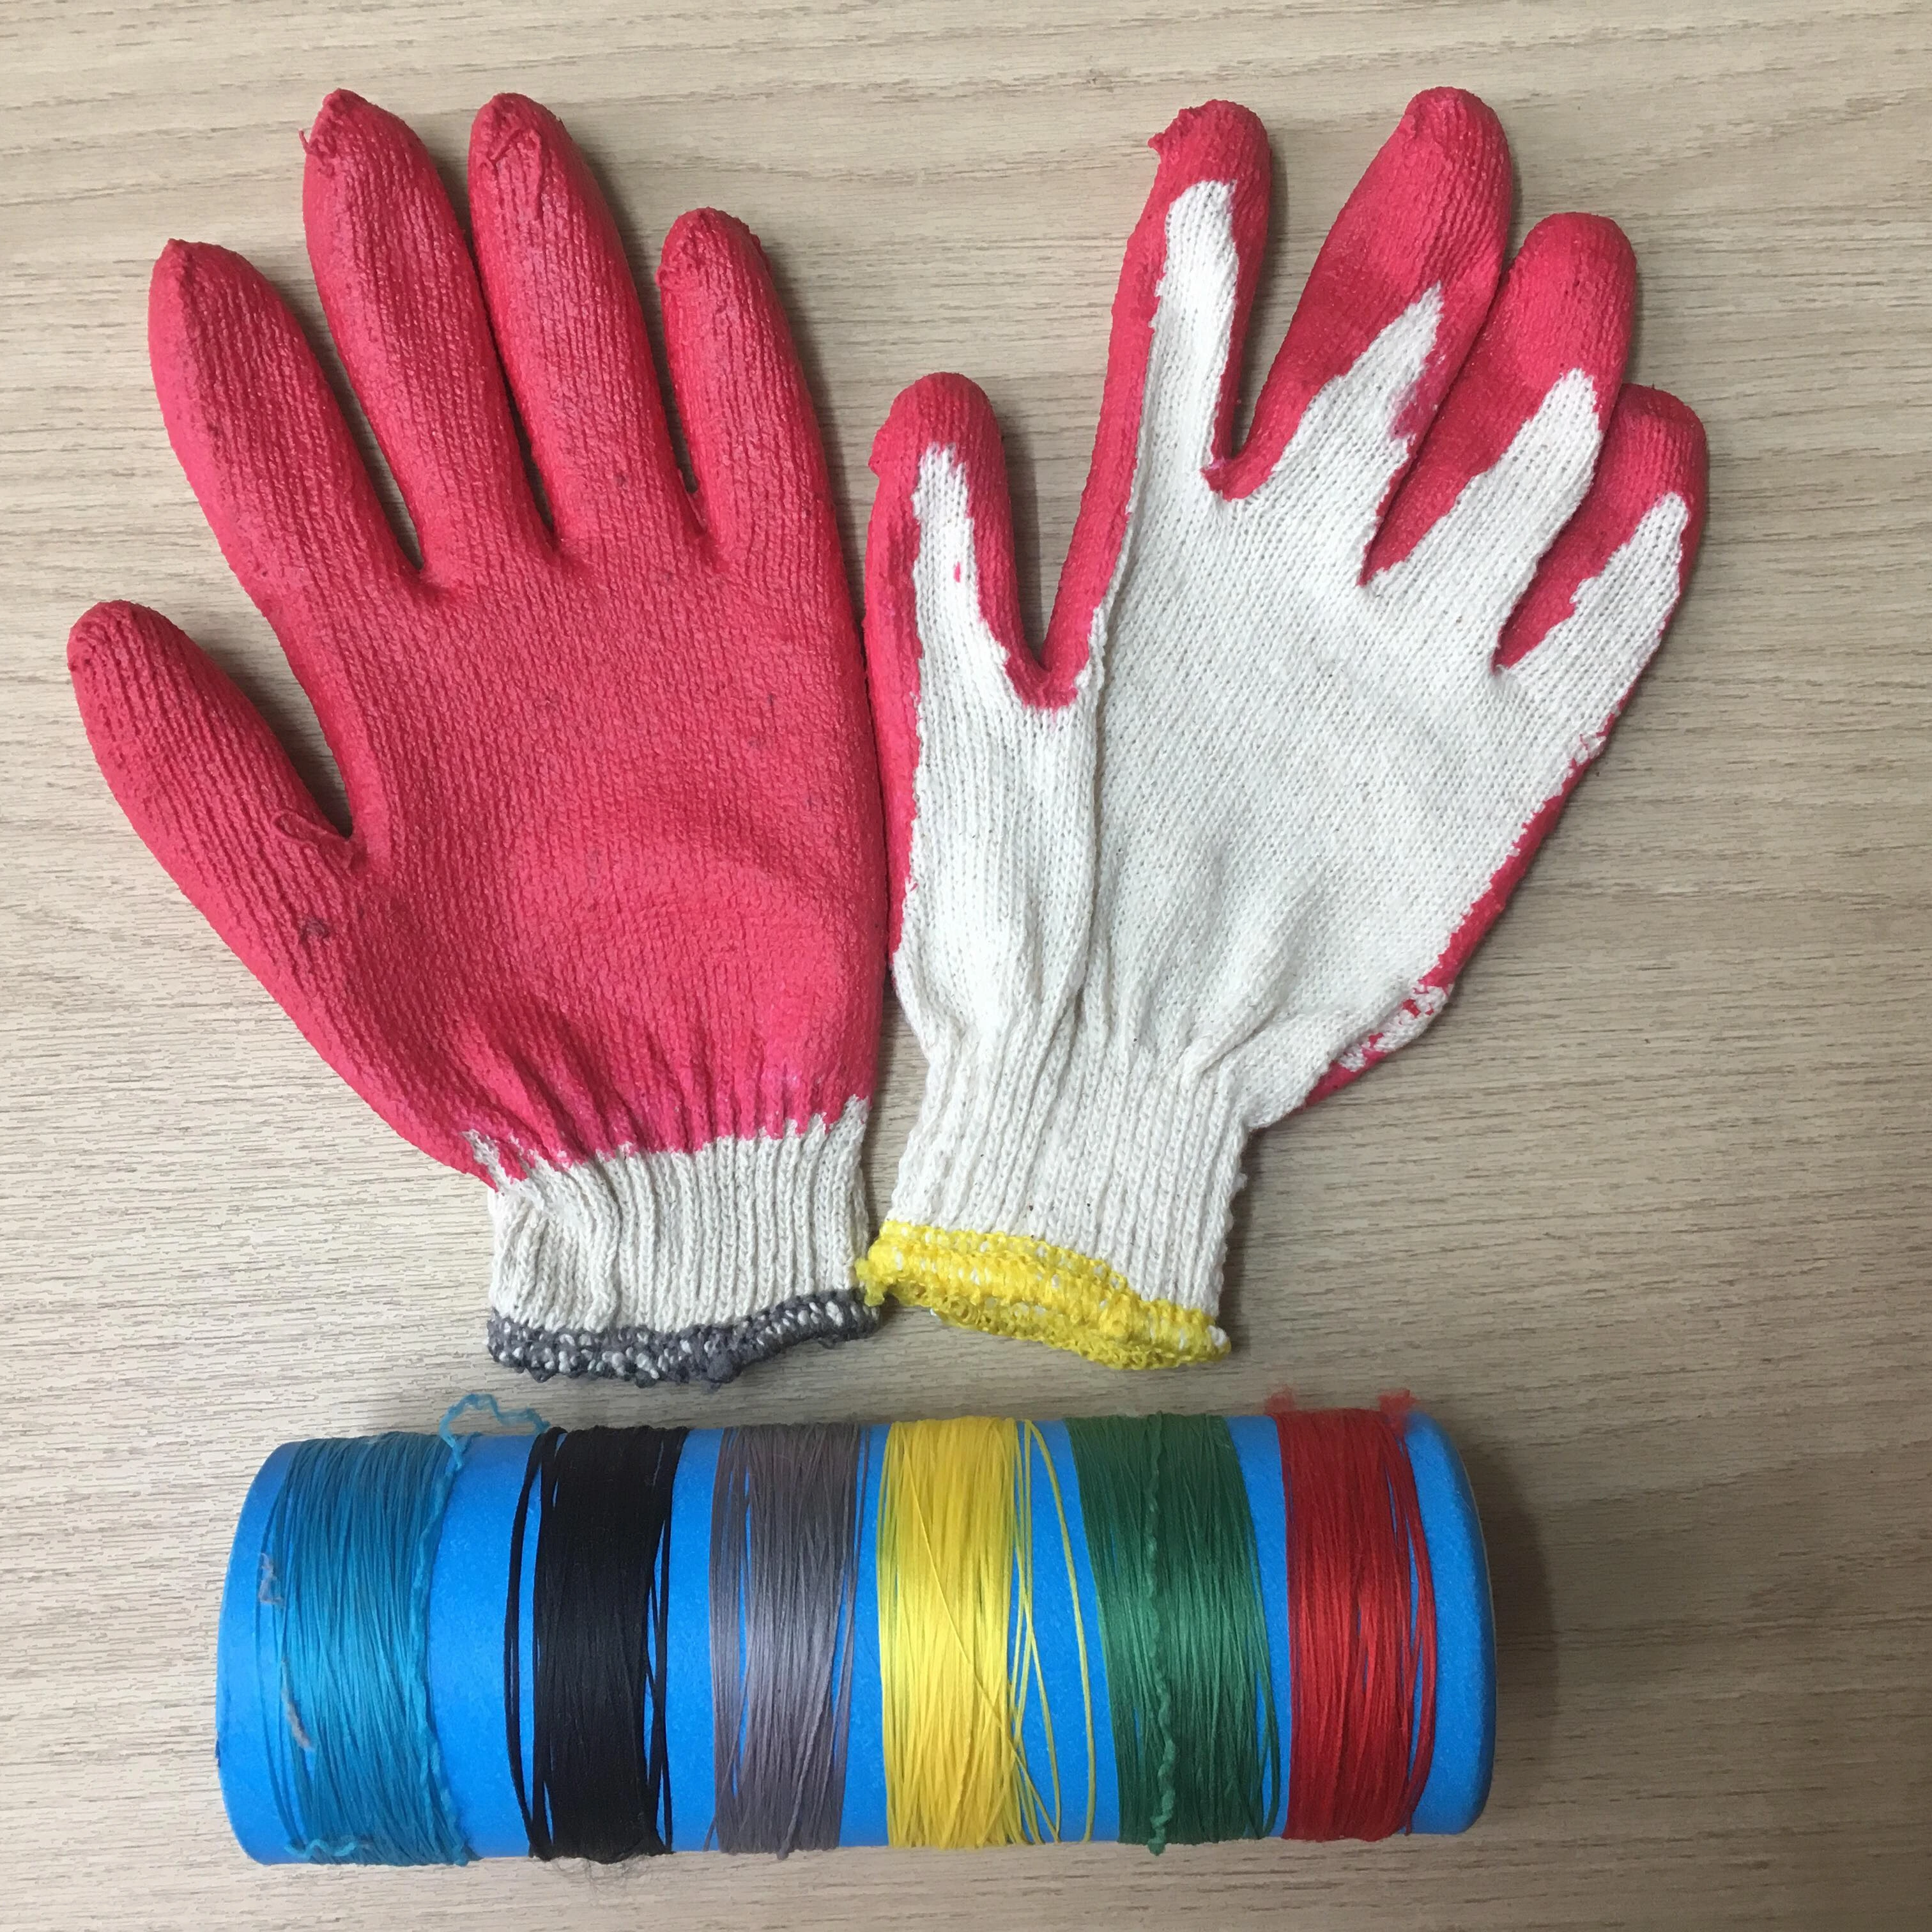 Work Safety Gloves Cotton Latex Palm Coated Rubber Palm Coated WT 